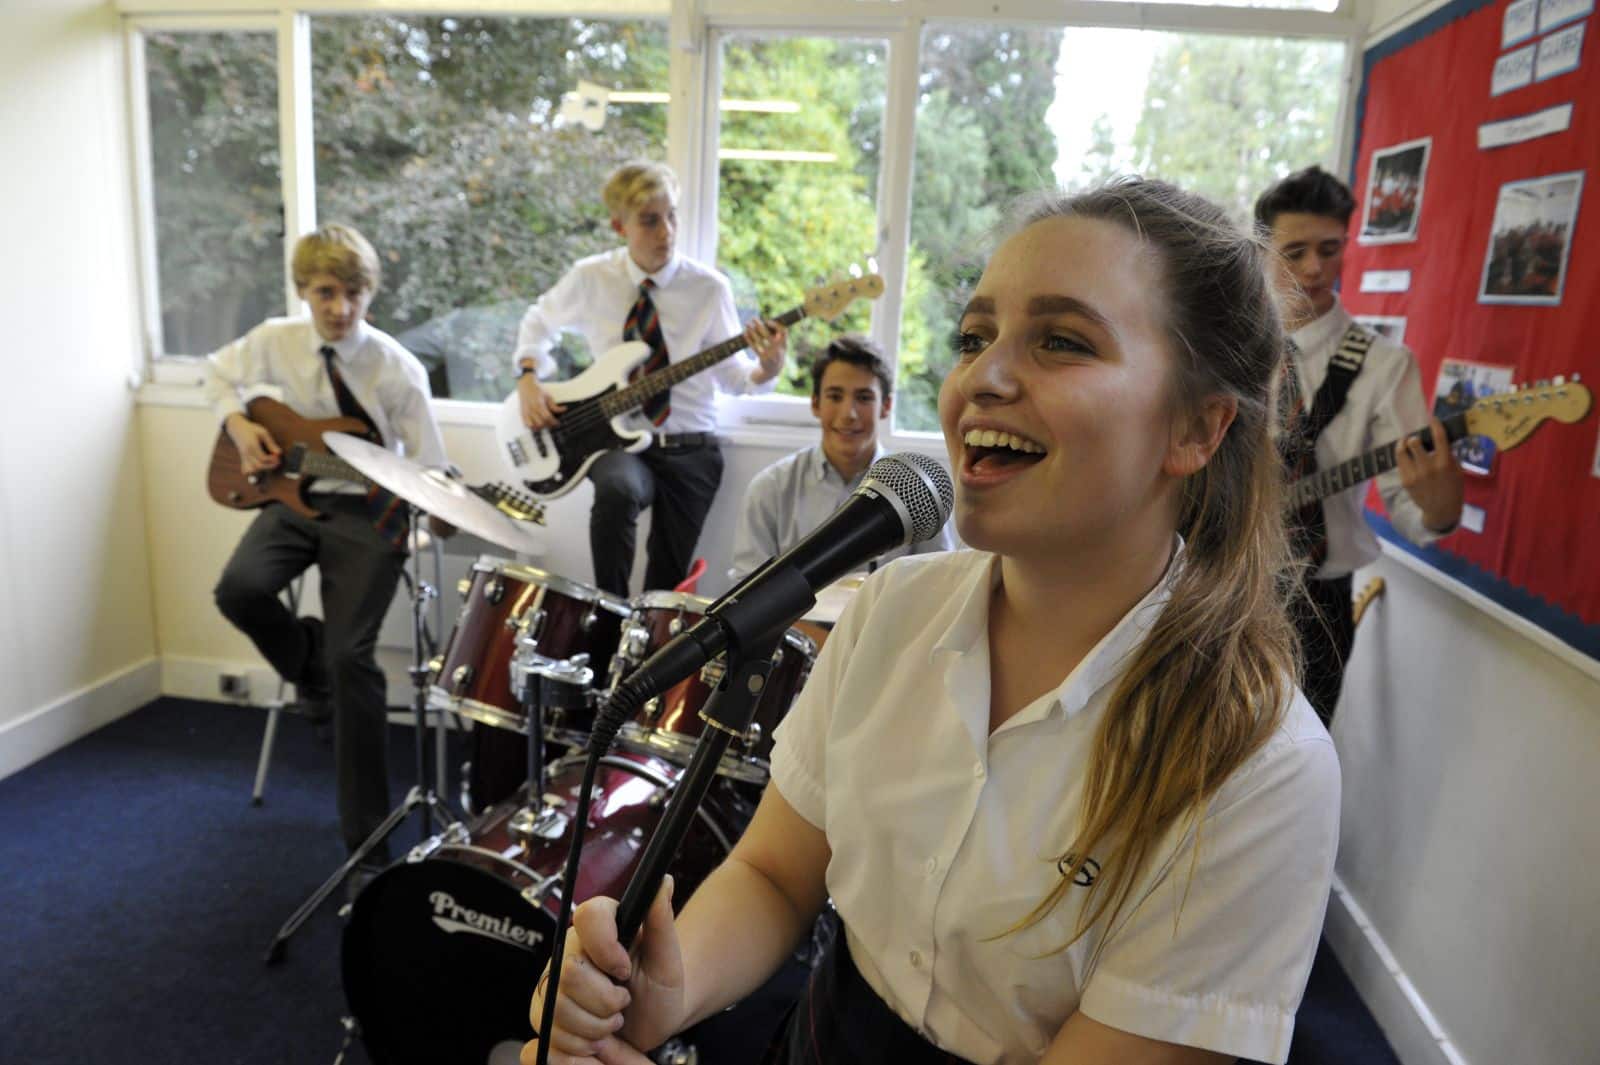 Female student singing with a band in the background